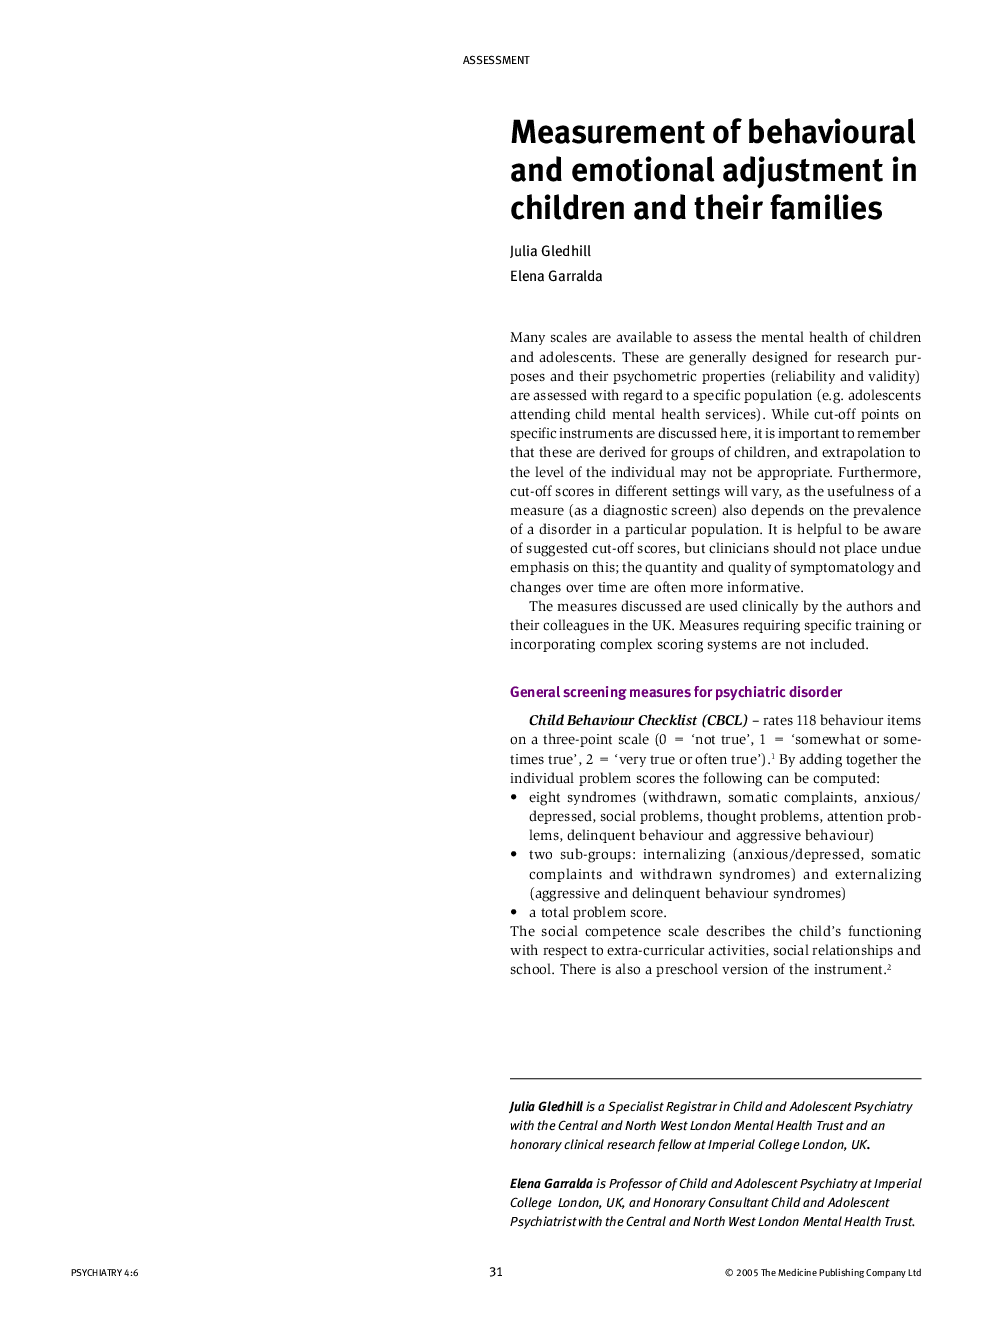 Measurement of behavioural and emotional adjustment in children and their families